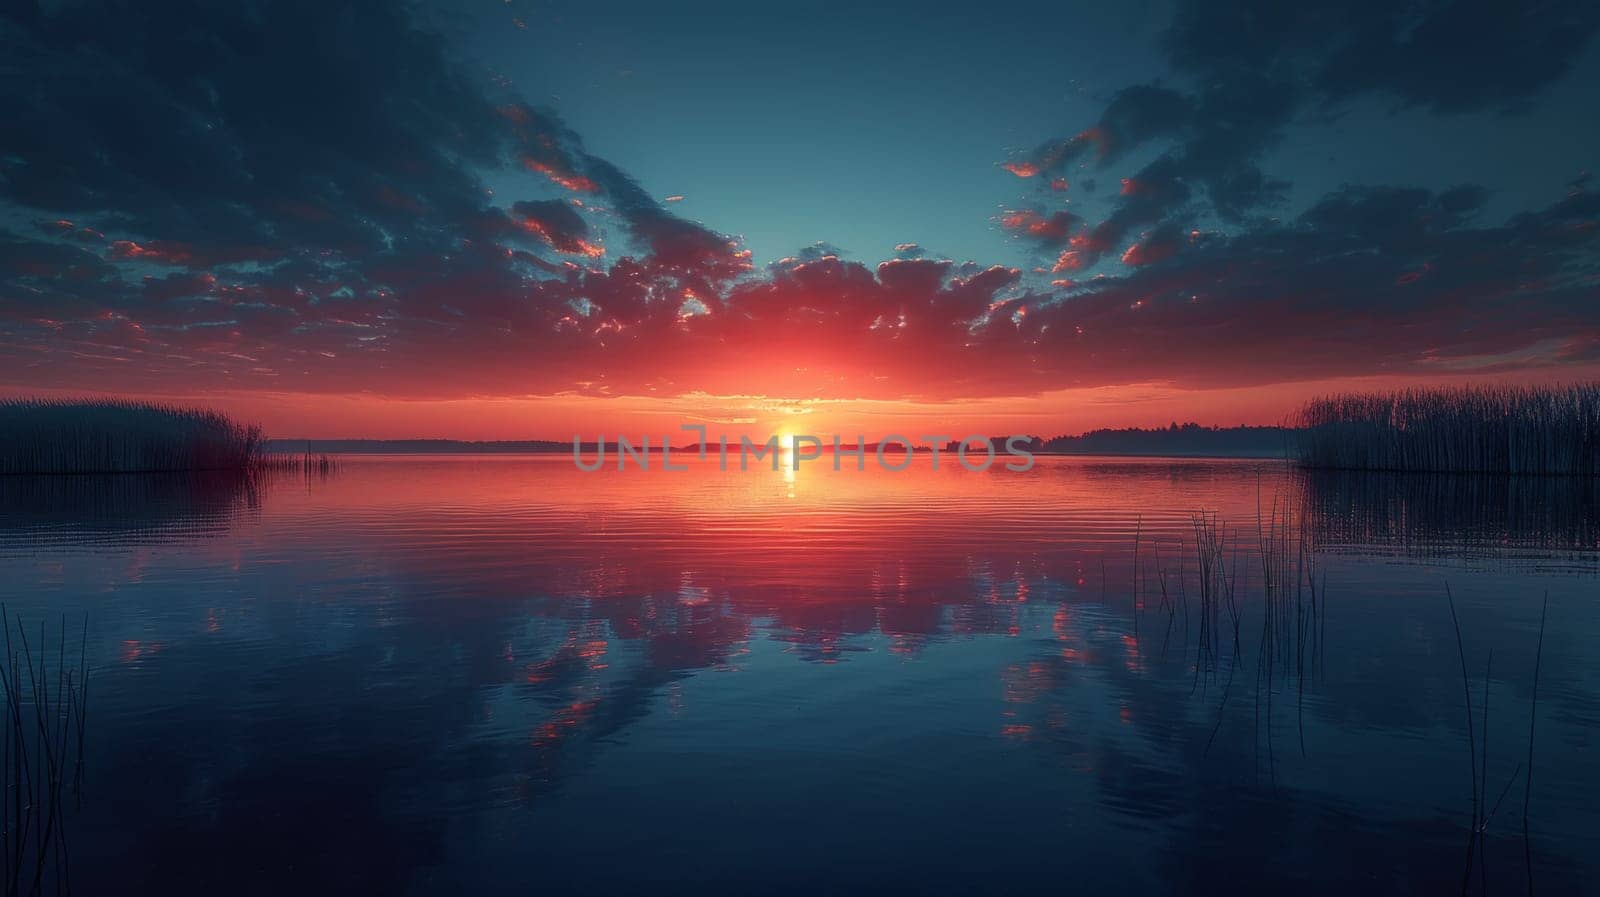 A sunset over a calm body of water with grasses and trees, AI by starush